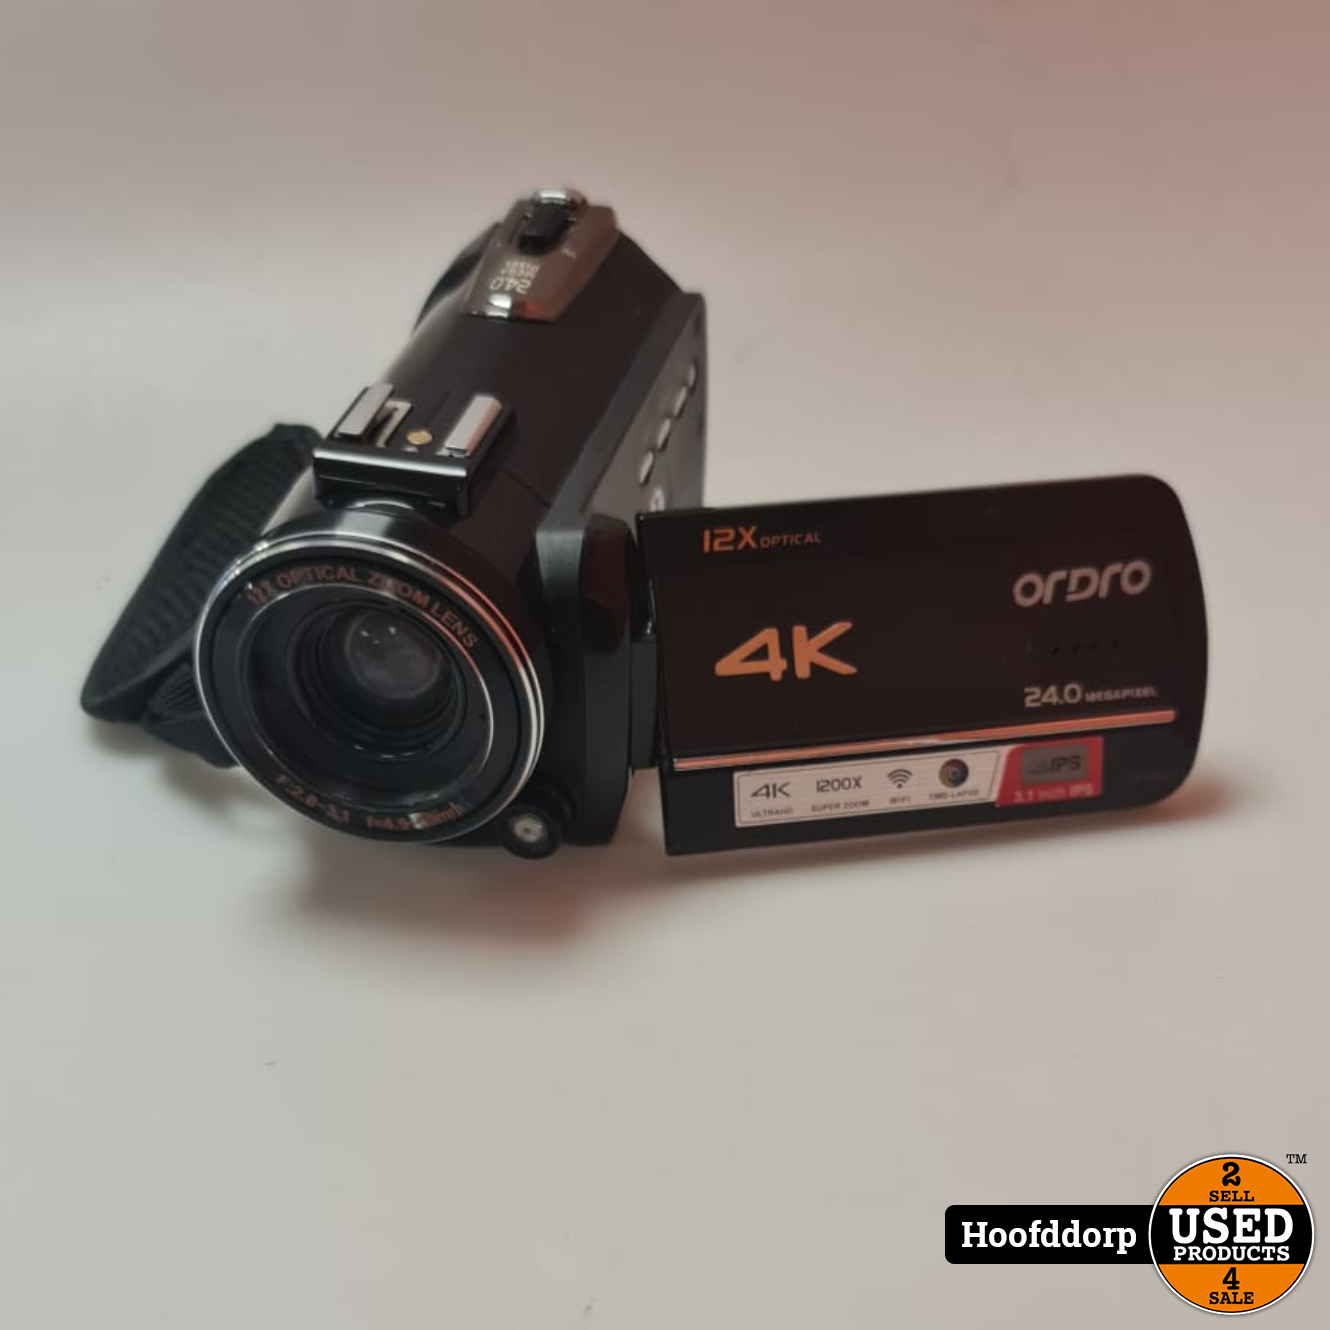 ordro HDR AC5 4H Hd Camera in koffer - Used Products Hoofddorp